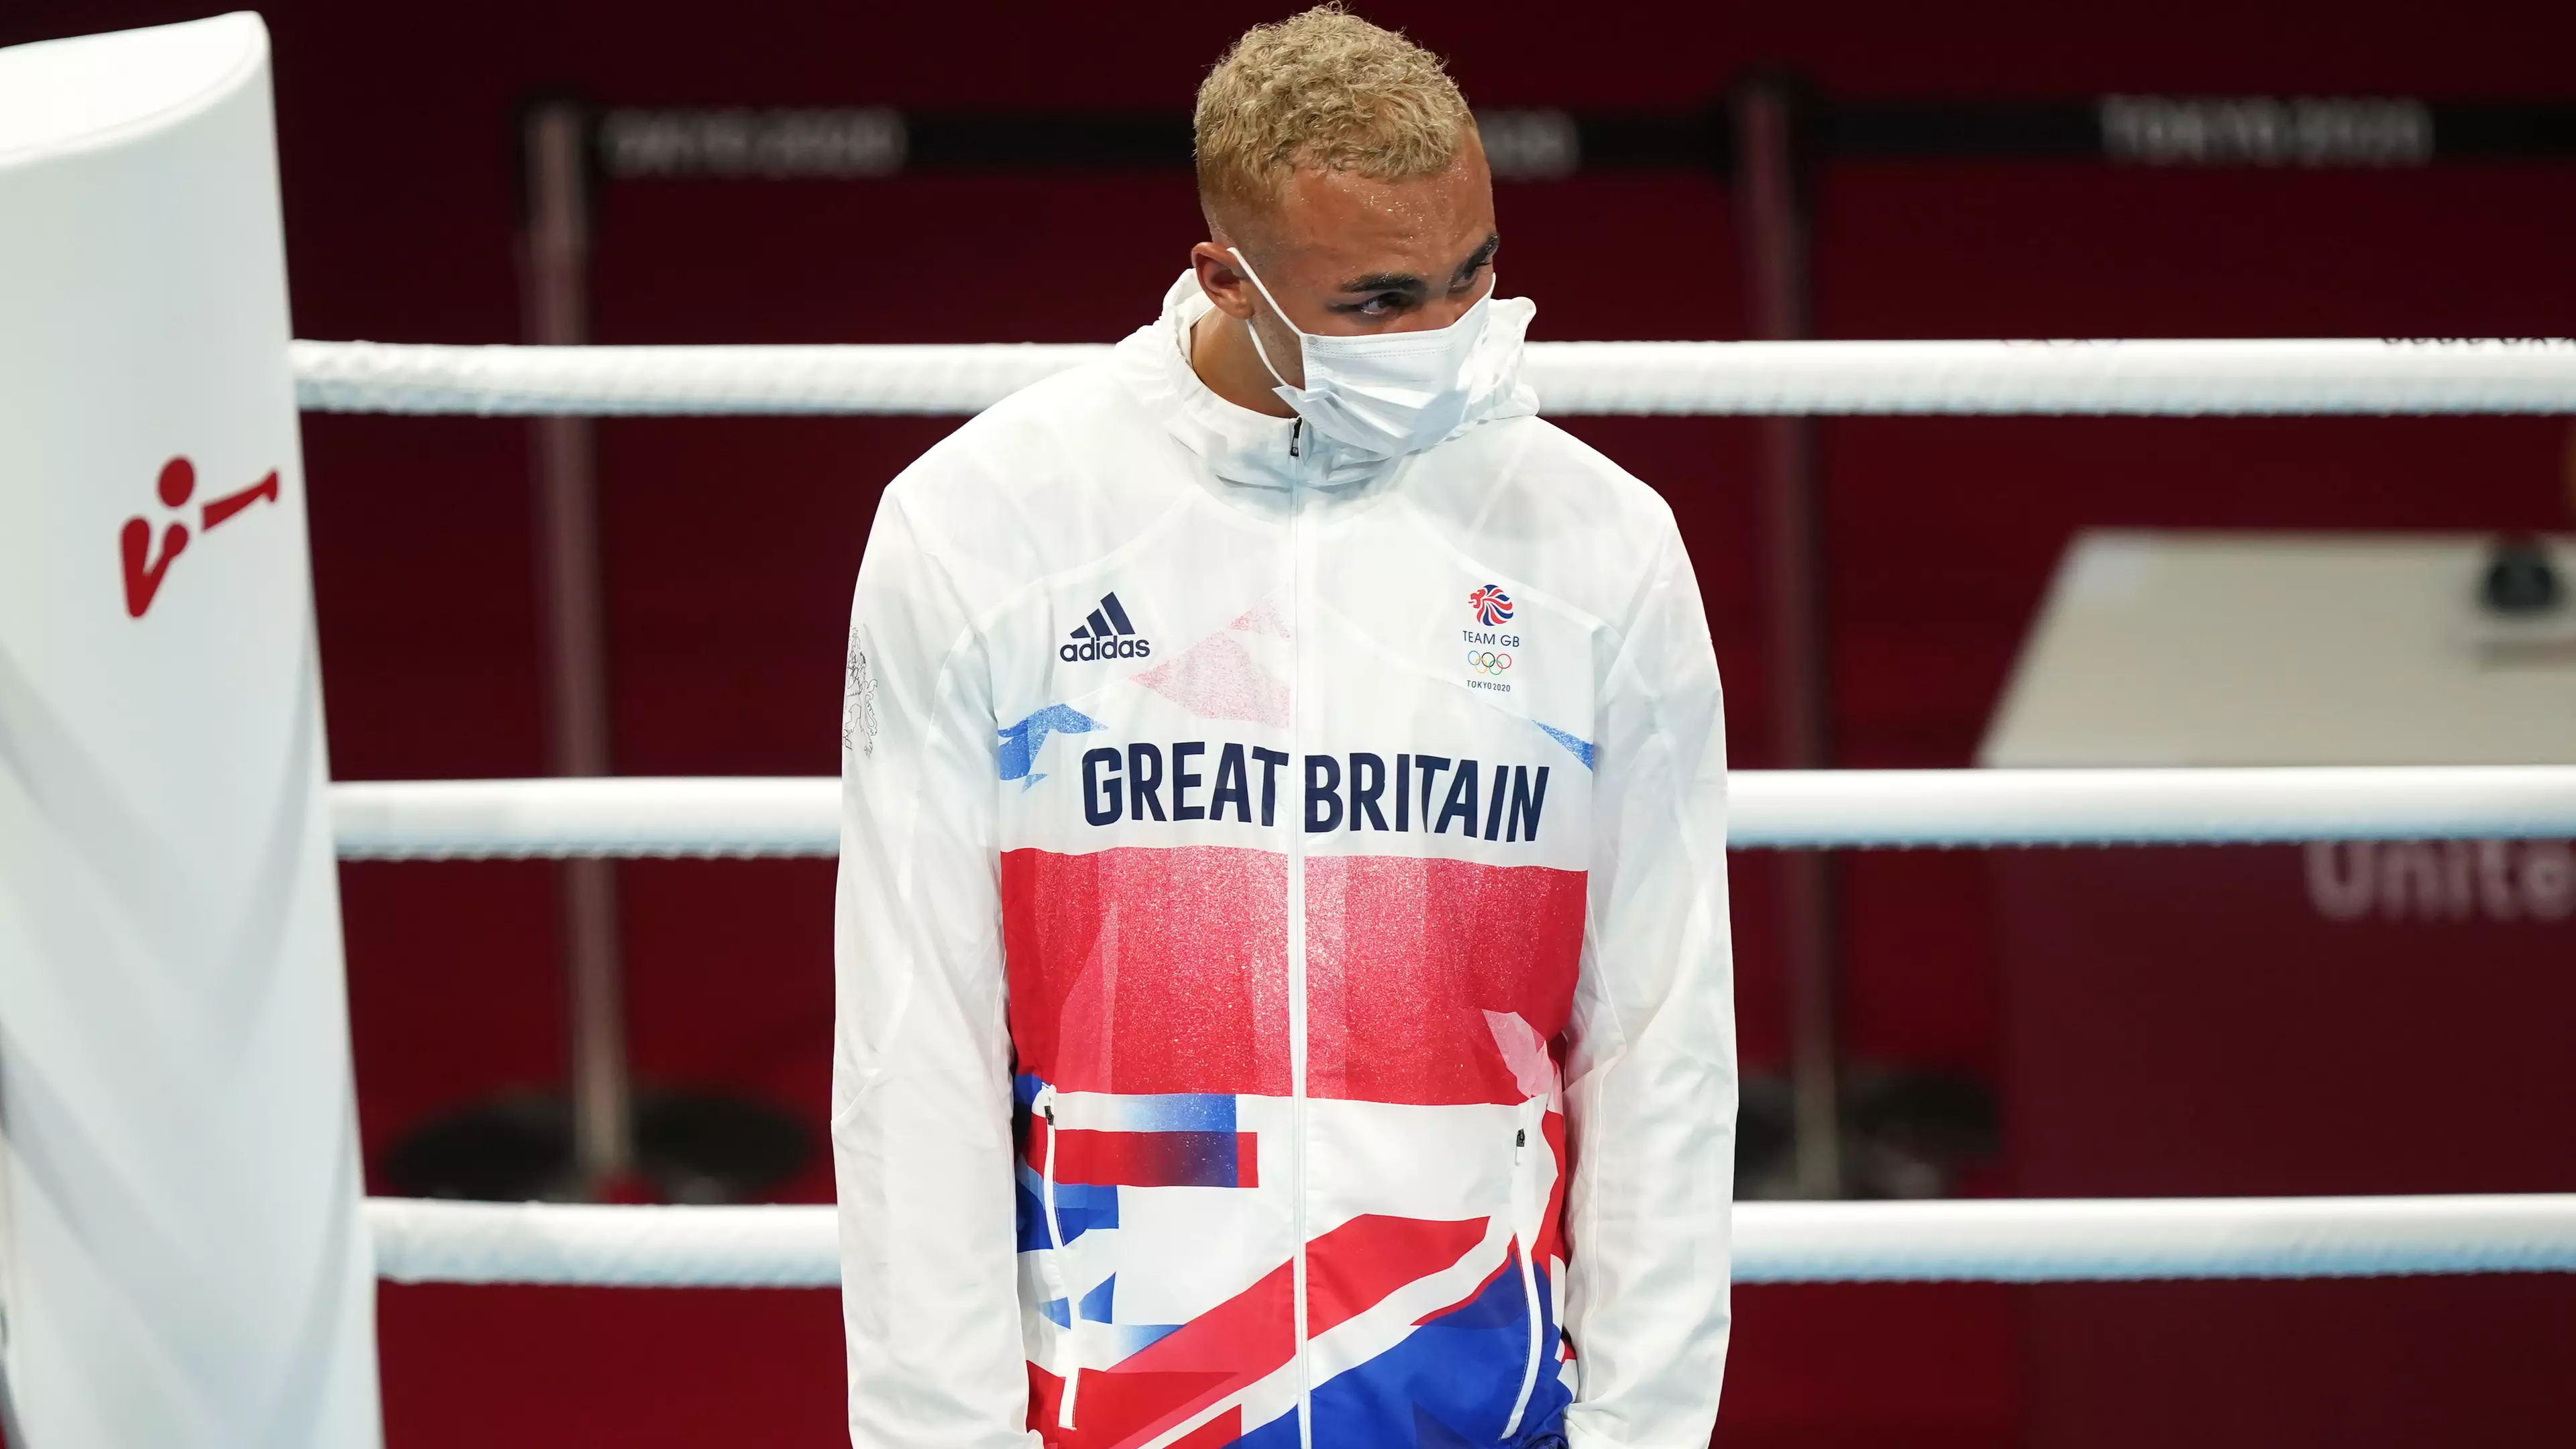 Olympic Boxer Ben Whittaker Refuses To Wear Silver Medal On Podium